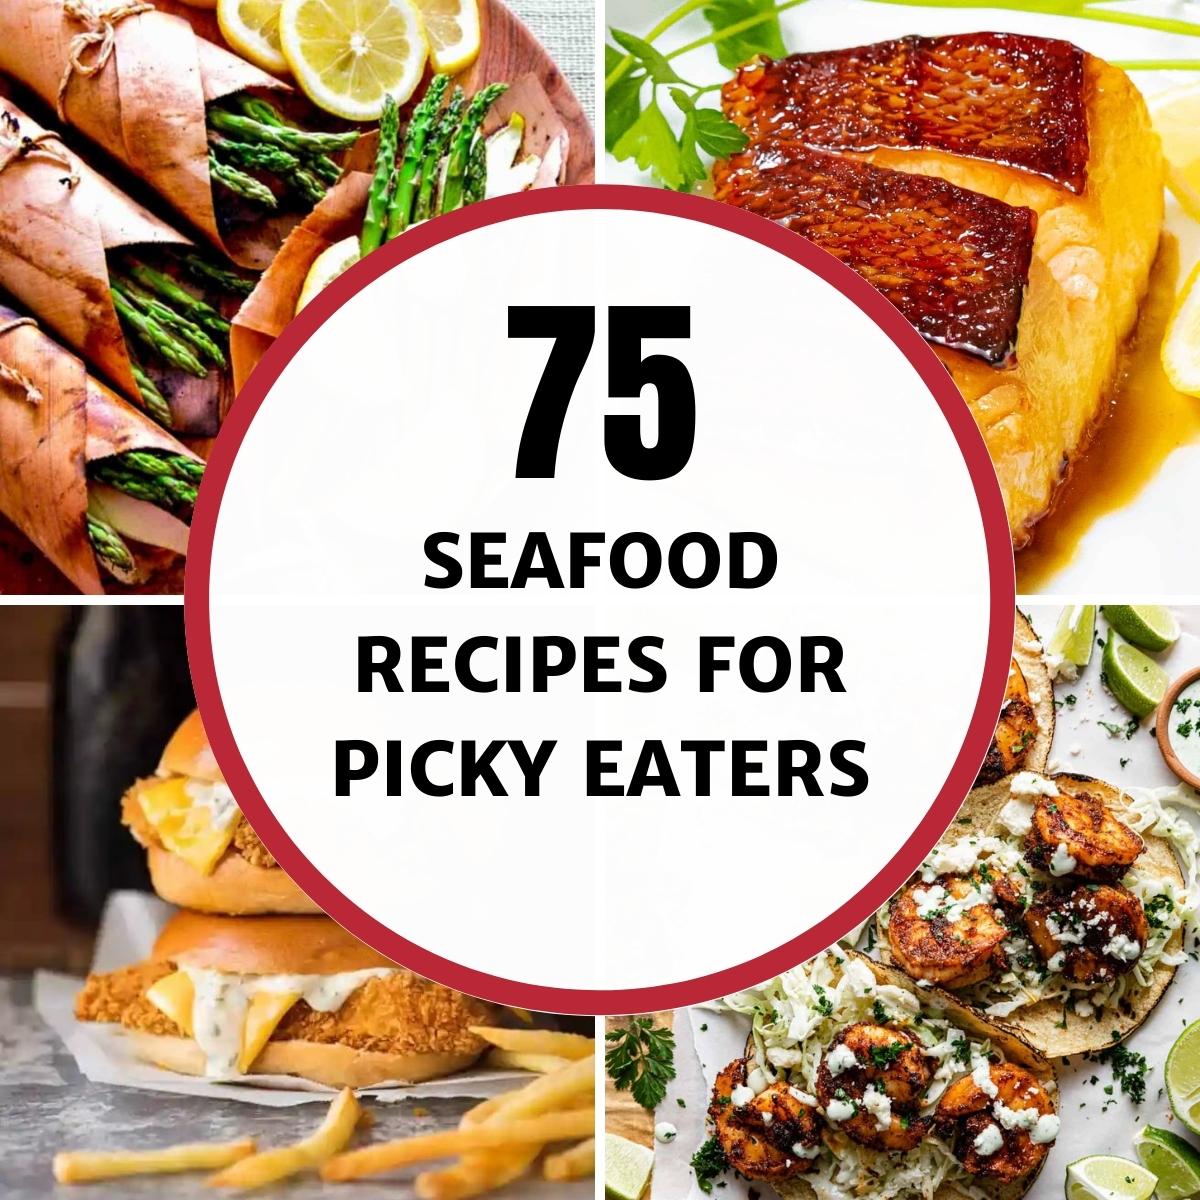 https://www.hwcmagazine.com/wp-content/uploads/2016/03/75-Best-Tasting-Fish-Seafood-Recipes-for-Picky-Eaters.jpg